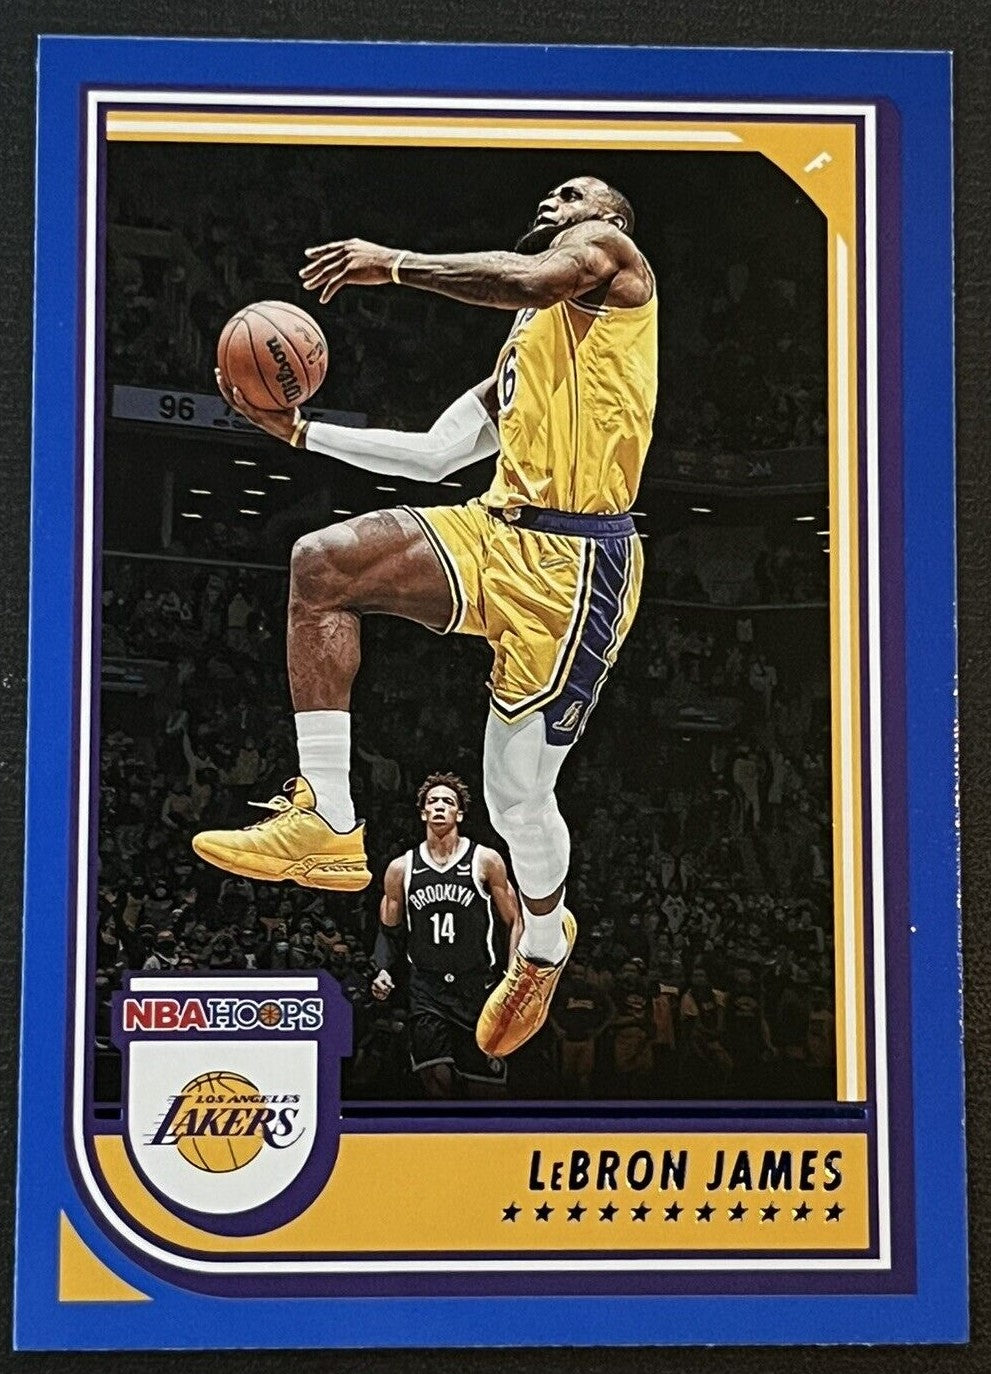 LeBron James 2022 2023 Hoops Series Mint Blue Parallel Version of Card